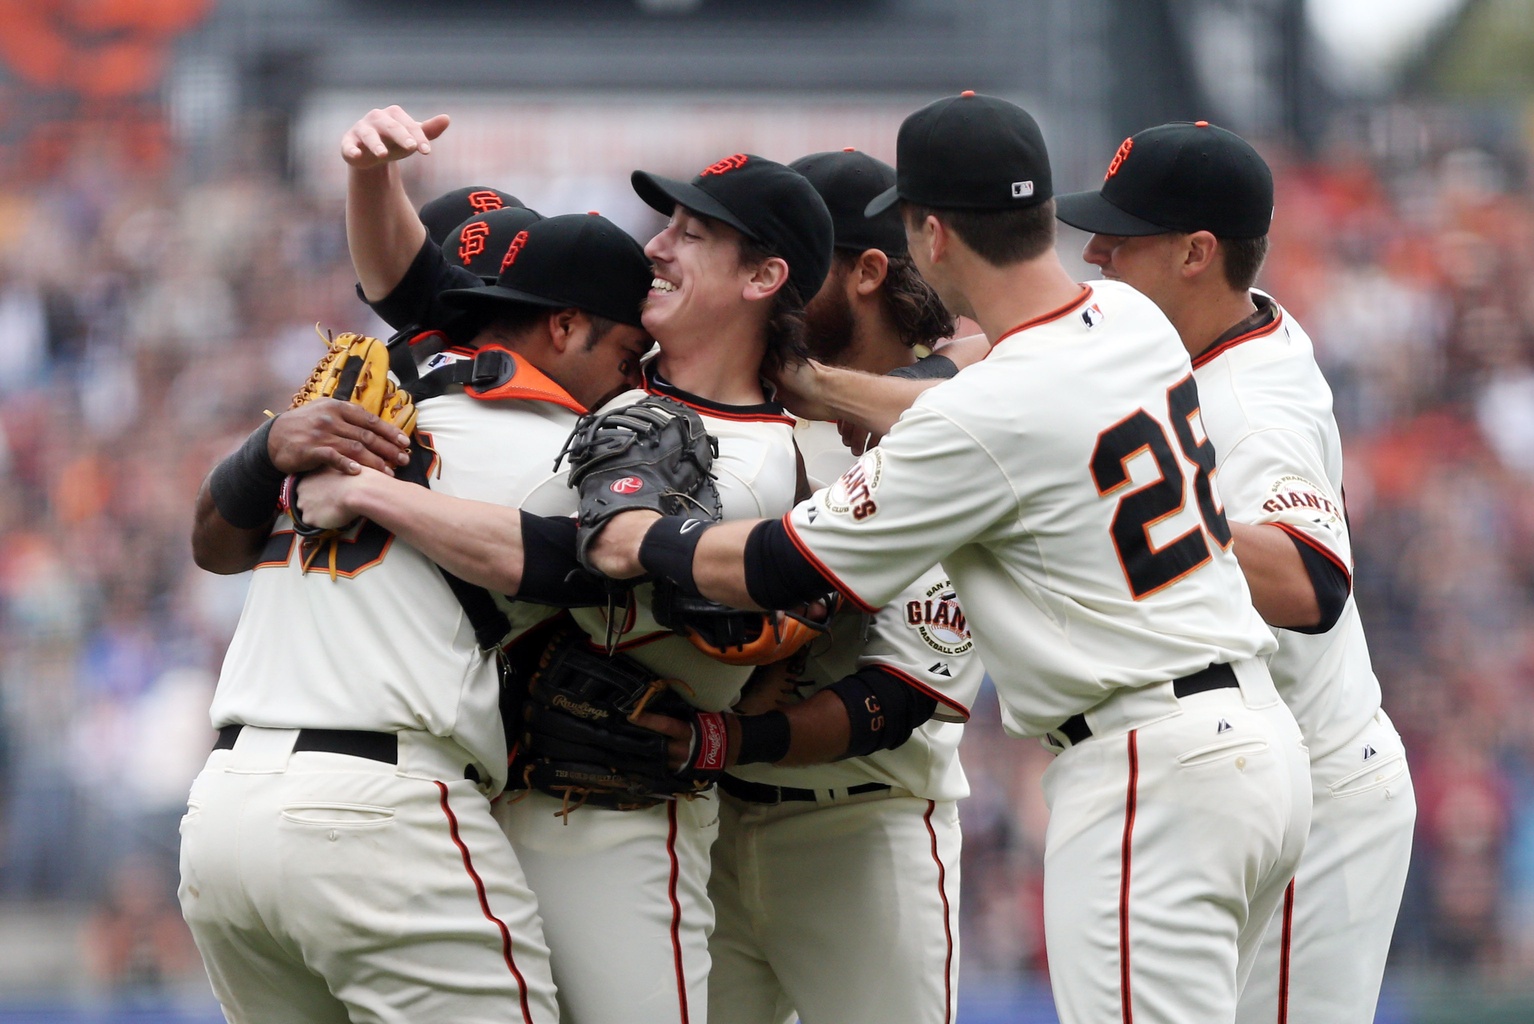 Lincecum wins Cy Young again